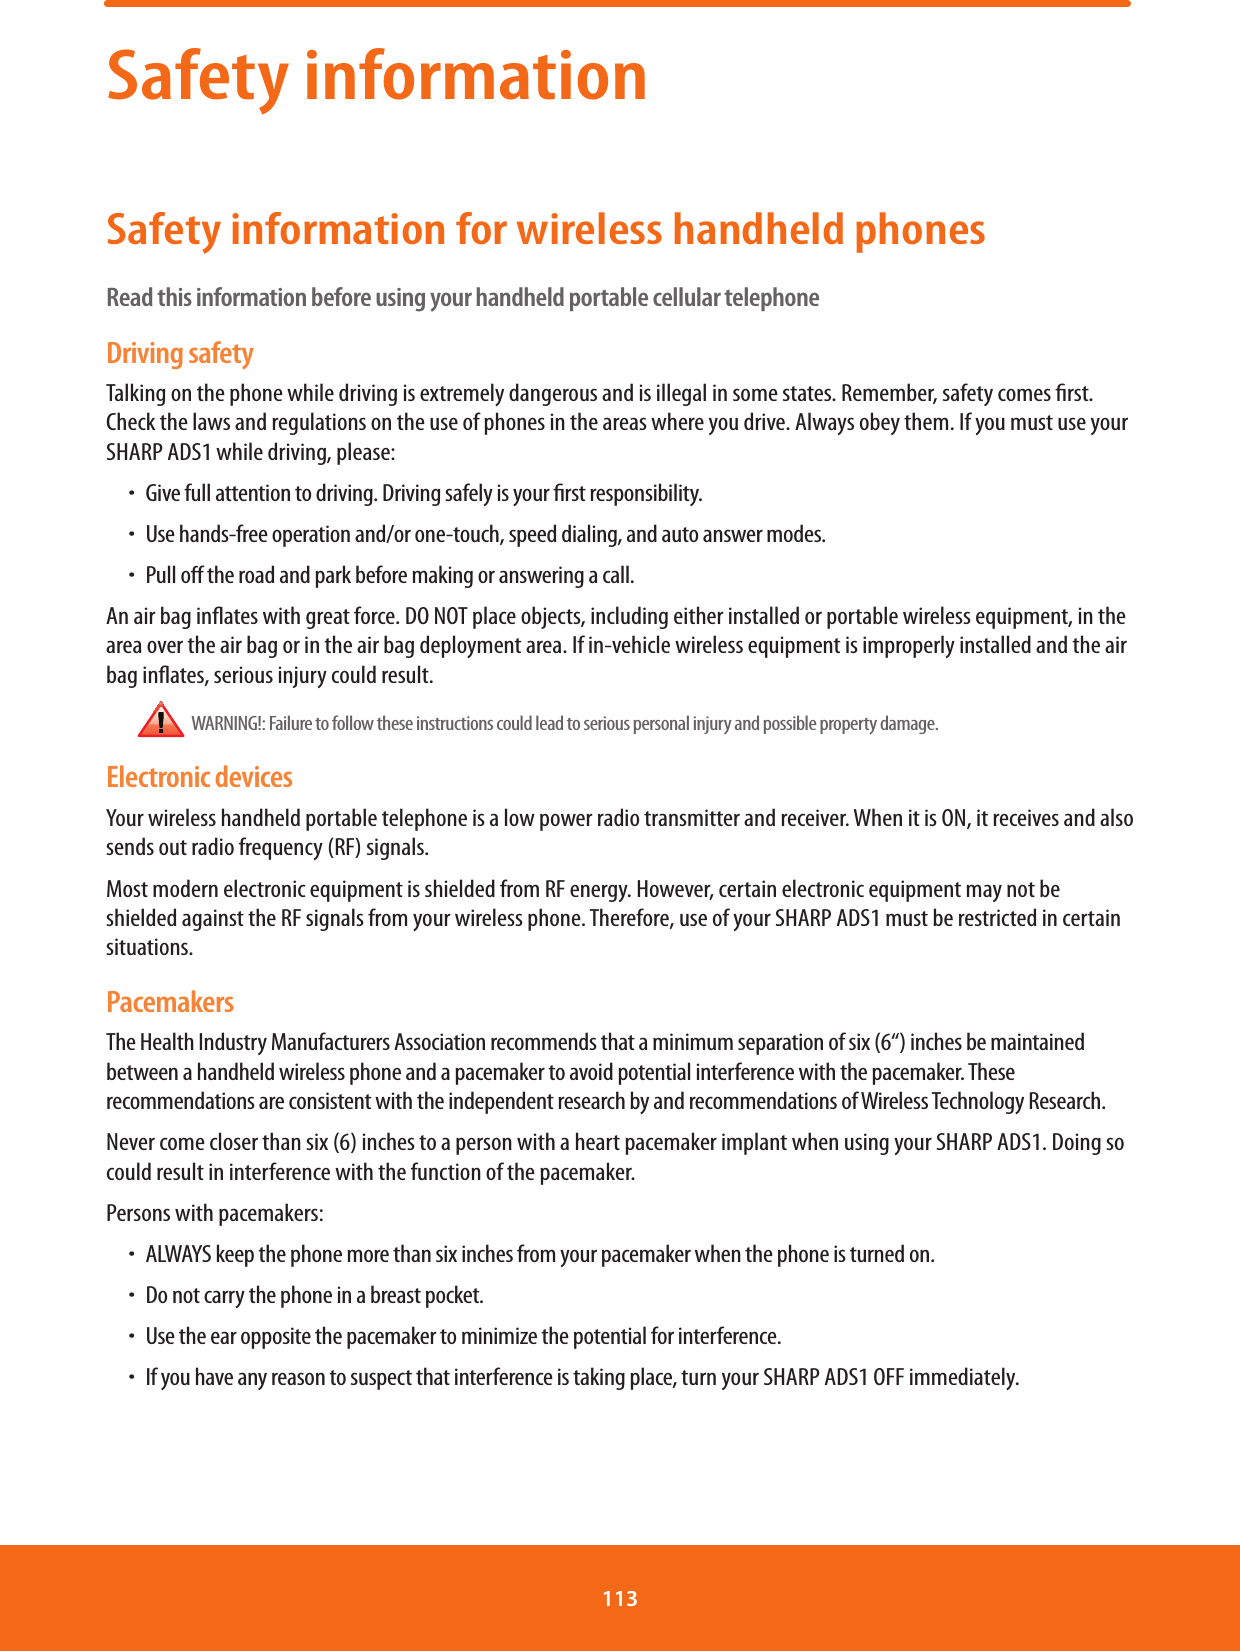 Safety informationSafety information for wireless handheld phonesRead this information before using your handheld portable cellular telephoneDriving safetyTalking on the phone while driving is extremely dangerous and is illegal in some states. Remember, safety comes rst. Check the laws and regulations on the use of phones in the areas where you drive. Always obey them. If you must use your SHARP ADS1 while driving, please:ħGive full attention to driving. Driving safely is your rst responsibility.ħUse hands-free operation and/or one-touch, speed dialing, and auto answer modes.ħPull o the road and park before making or answering a call.An air bag inates with great force. DO NOT place objects, including either installed or portable wireless equipment, in the area over the air bag or in the air bag deployment area. If in-vehicle wireless equipment is improperly installed and the air bag inates, serious injury could result.  WARNING!: Failure to follow these instructions could lead to serious personal injury and possible property damage.Electronic devicesYour wireless handheld portable telephone is a low power radio transmitter and receiver. When it is ON, it receives and also sends out radio frequency (RF) signals.Most modern electronic equipment is shielded from RF energy. However, certain electronic equipment may not be shielded against the RF signals from your wireless phone. Therefore, use of your SHARP ADS1 must be restricted in certain situations.PacemakersThe Health Industry Manufacturers Association recommends that a minimum separation of six (6“) inches be maintained between a handheld wireless phone and a pacemaker to avoid potential interference with the pacemaker. These recommendations are consistent with the independent research by and recommendations of Wireless Technology Research.Never come closer than six (6) inches to a person with a heart pacemaker implant when using your SHARP ADS1. Doing so could result in interference with the function of the pacemaker.Persons with pacemakers:ħALWAYS keep the phone more than six inches from your pacemaker when the phone is turned on.ħDo not carry the phone in a breast pocket.ħUse the ear opposite the pacemaker to minimize the potential for interference.ħIf you have any reason to suspect that interference is taking place, turn your SHARP ADS1 OFF immediately.113 